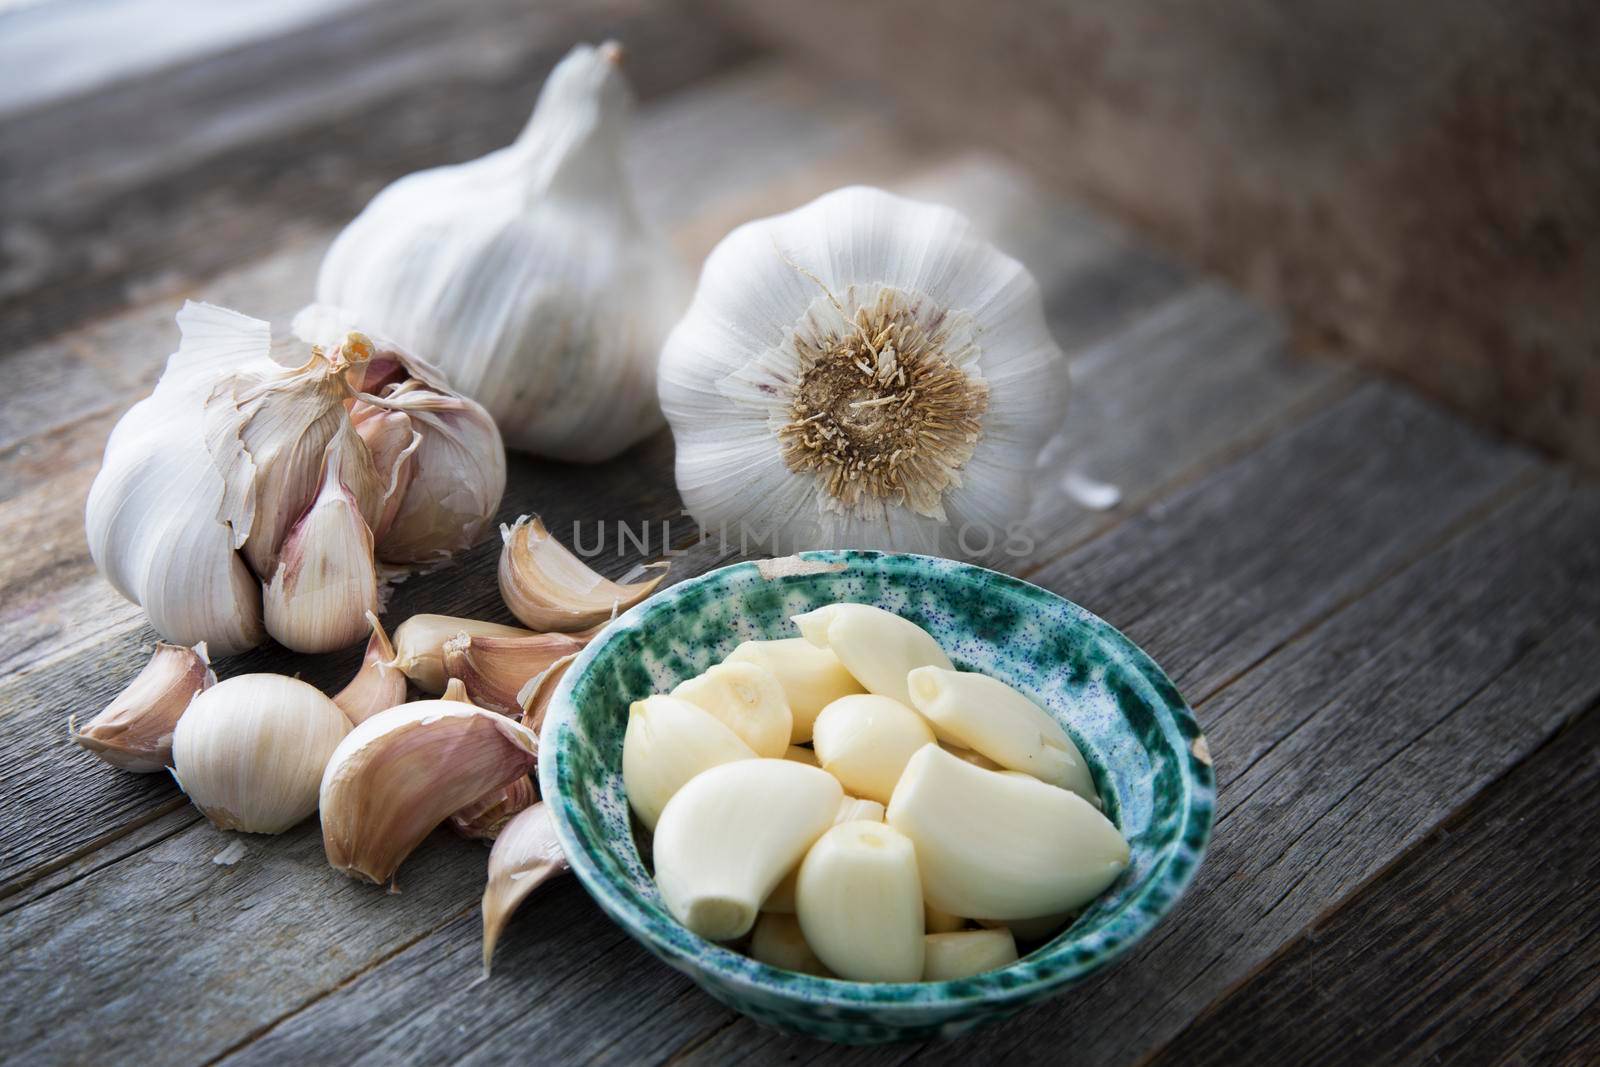 Cooking with Garlic by charlotteLake